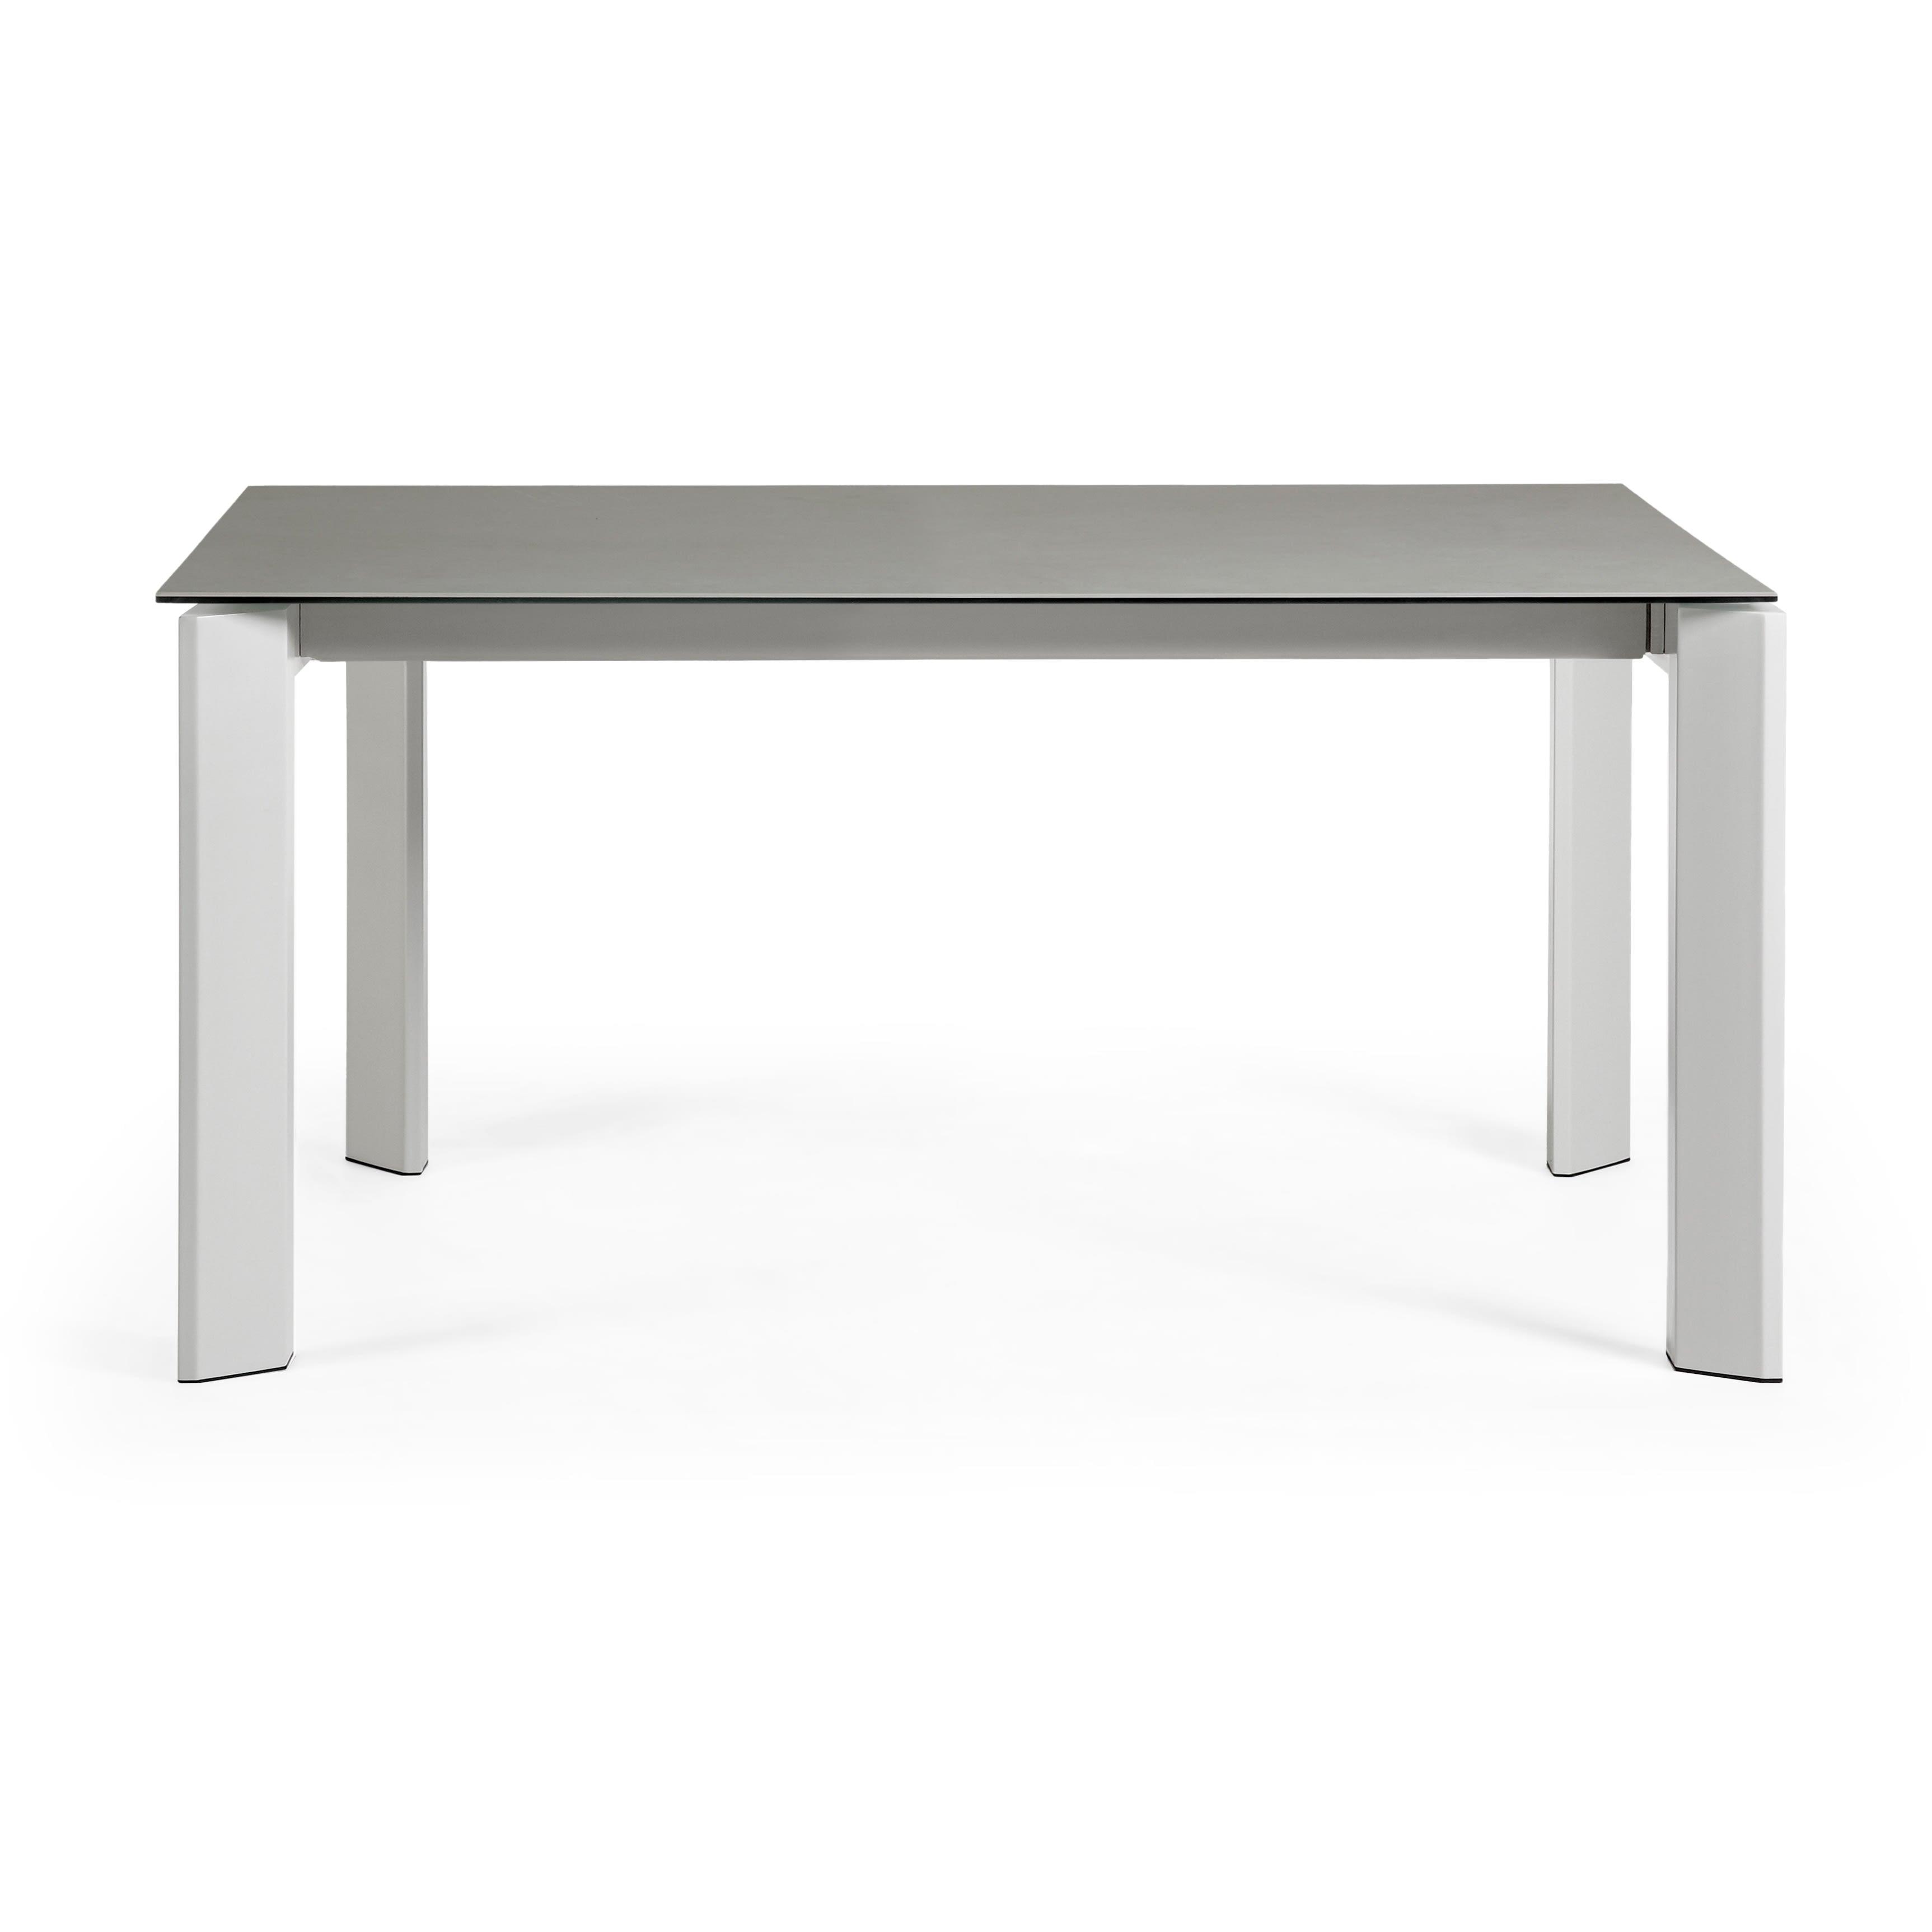 Axis porcelain extendable table with Hydra Lead finish and gray legs 160 (220) cm